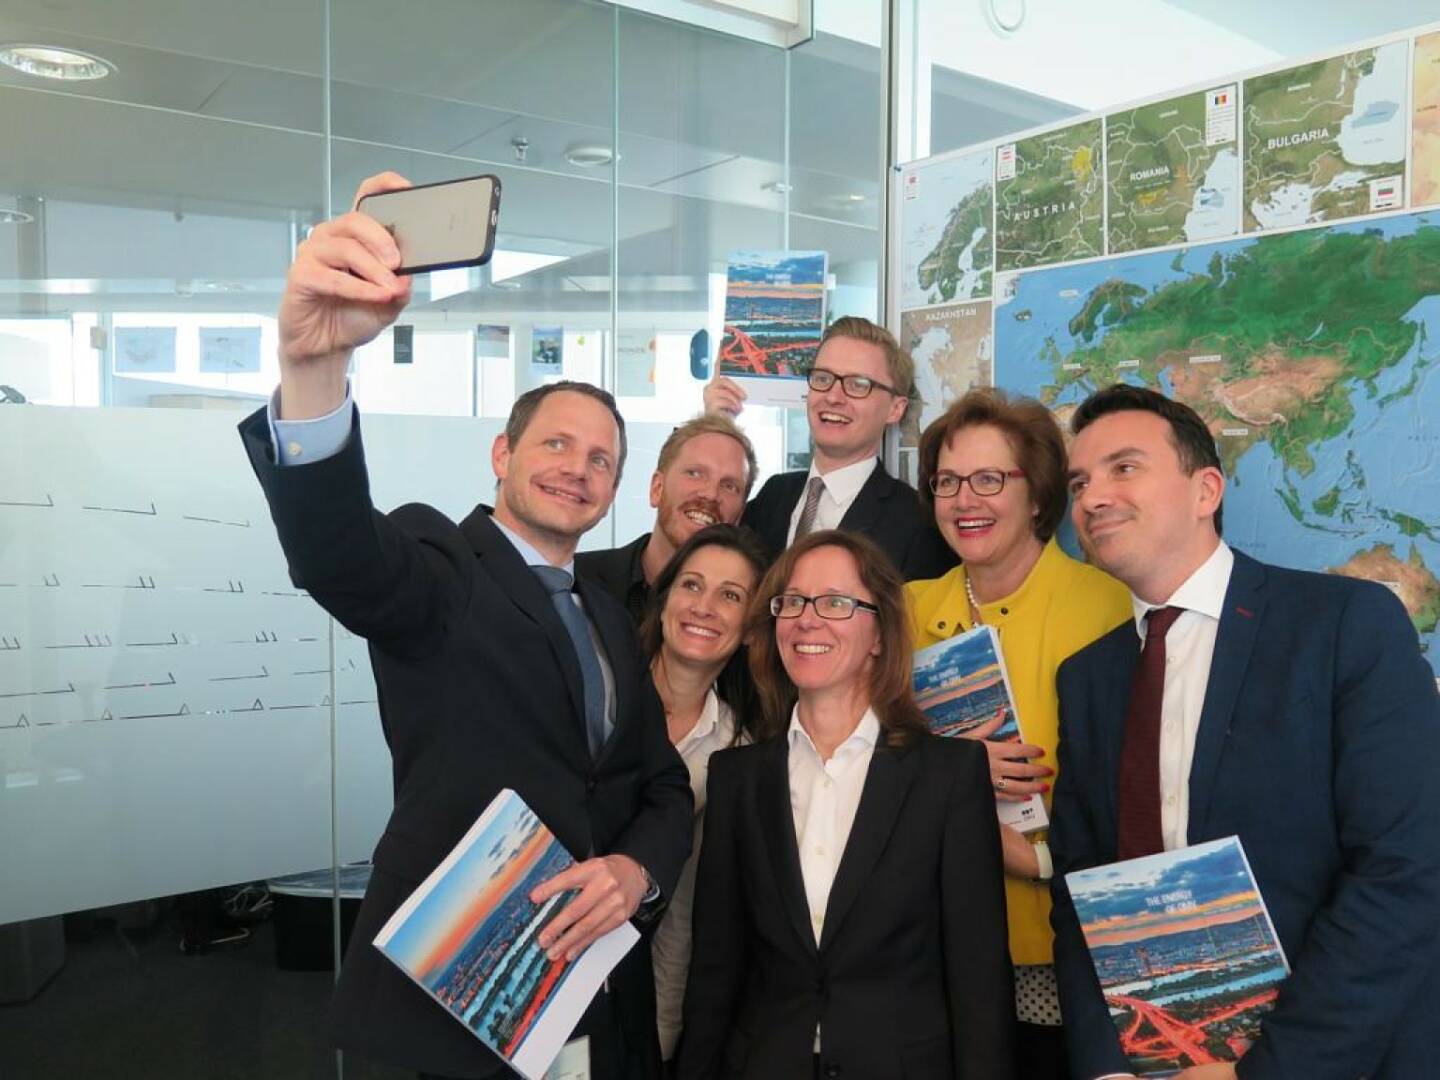 OMV - Bernhard Heneis: Selfie-time: After weeks of hard work our colleagues finally received the first copies of the OMV Annual Report 2016. Download your copy here: http://bit.ly/2r7973M